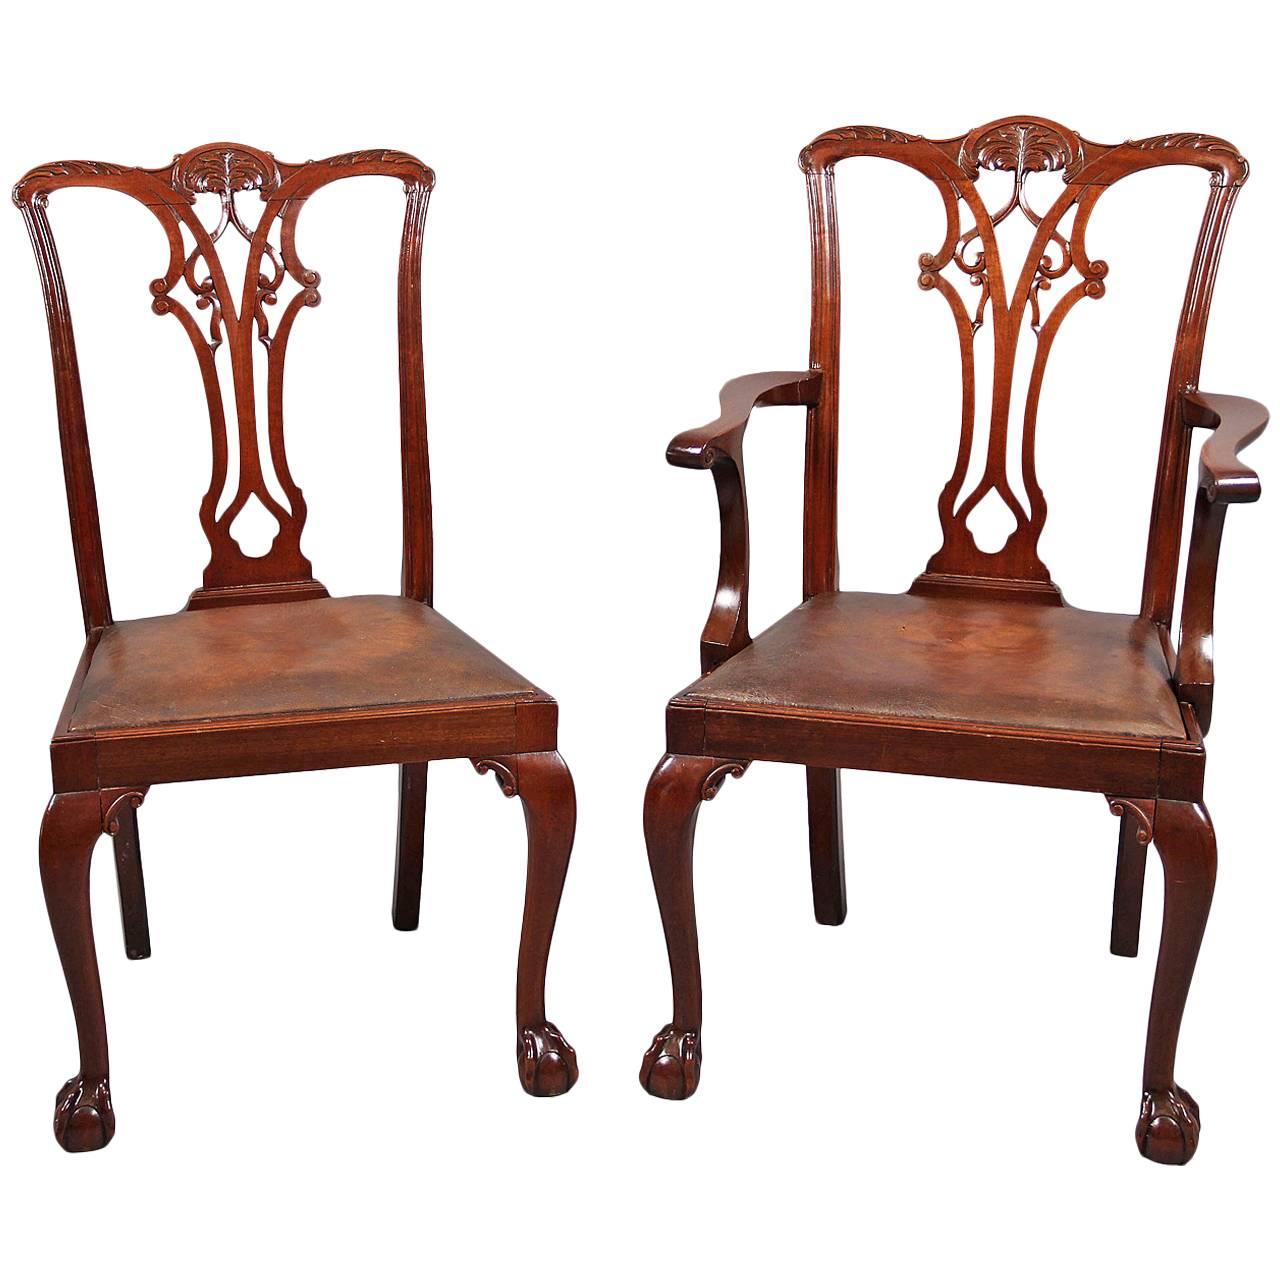 Set of 12, Late 19th to Early 20th Century Chippendale Style Dining Chairs